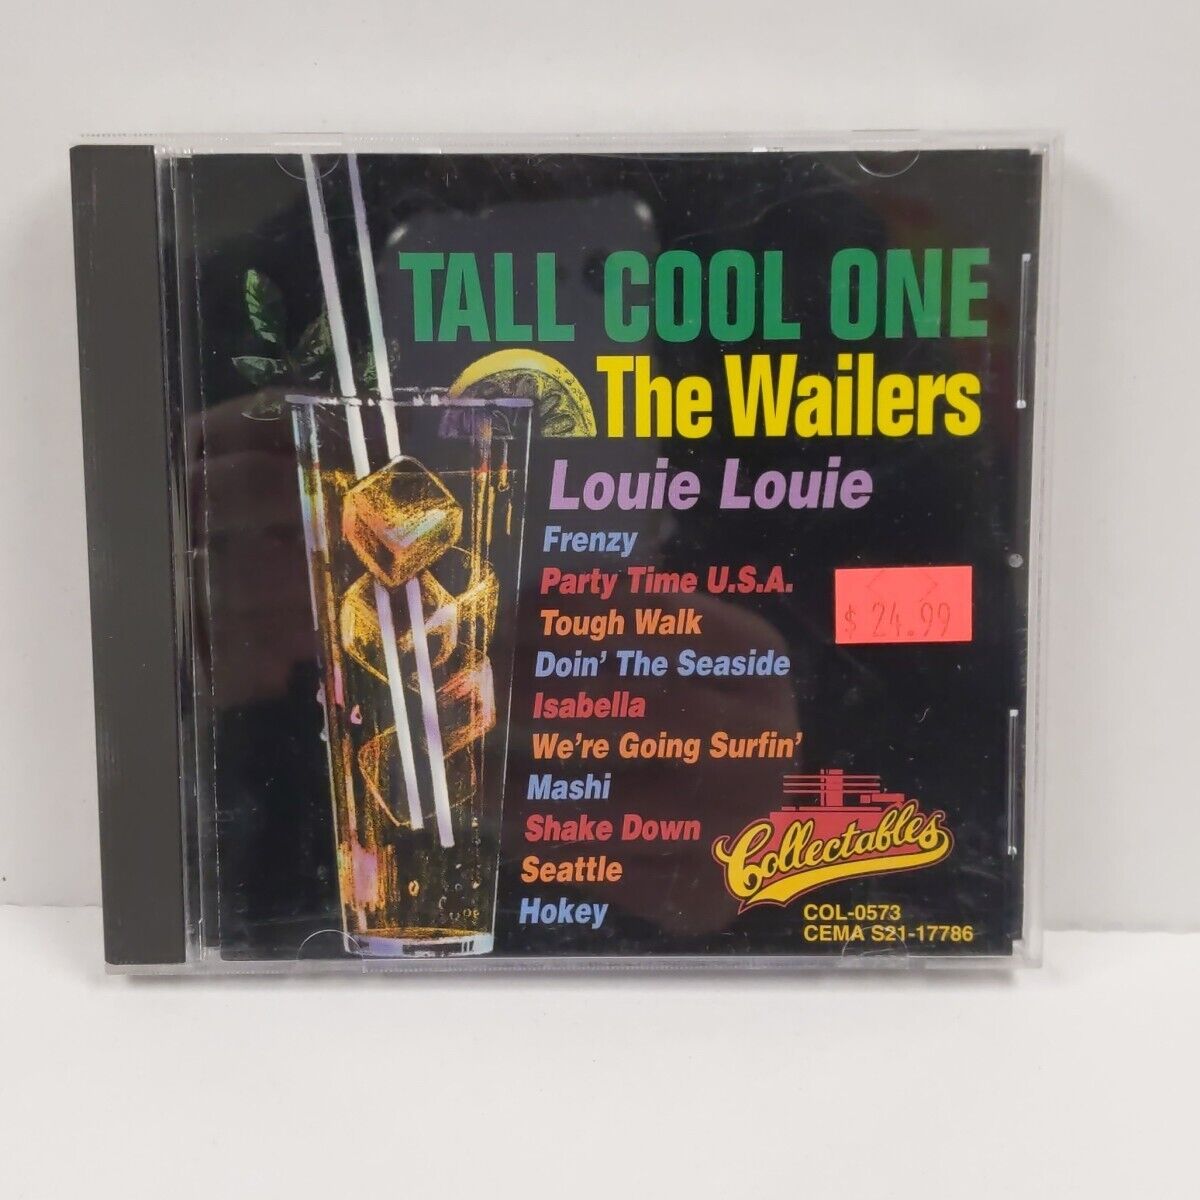 Vintage The Wailers - Tall Cool One 1994 Rock CD Album Compilation